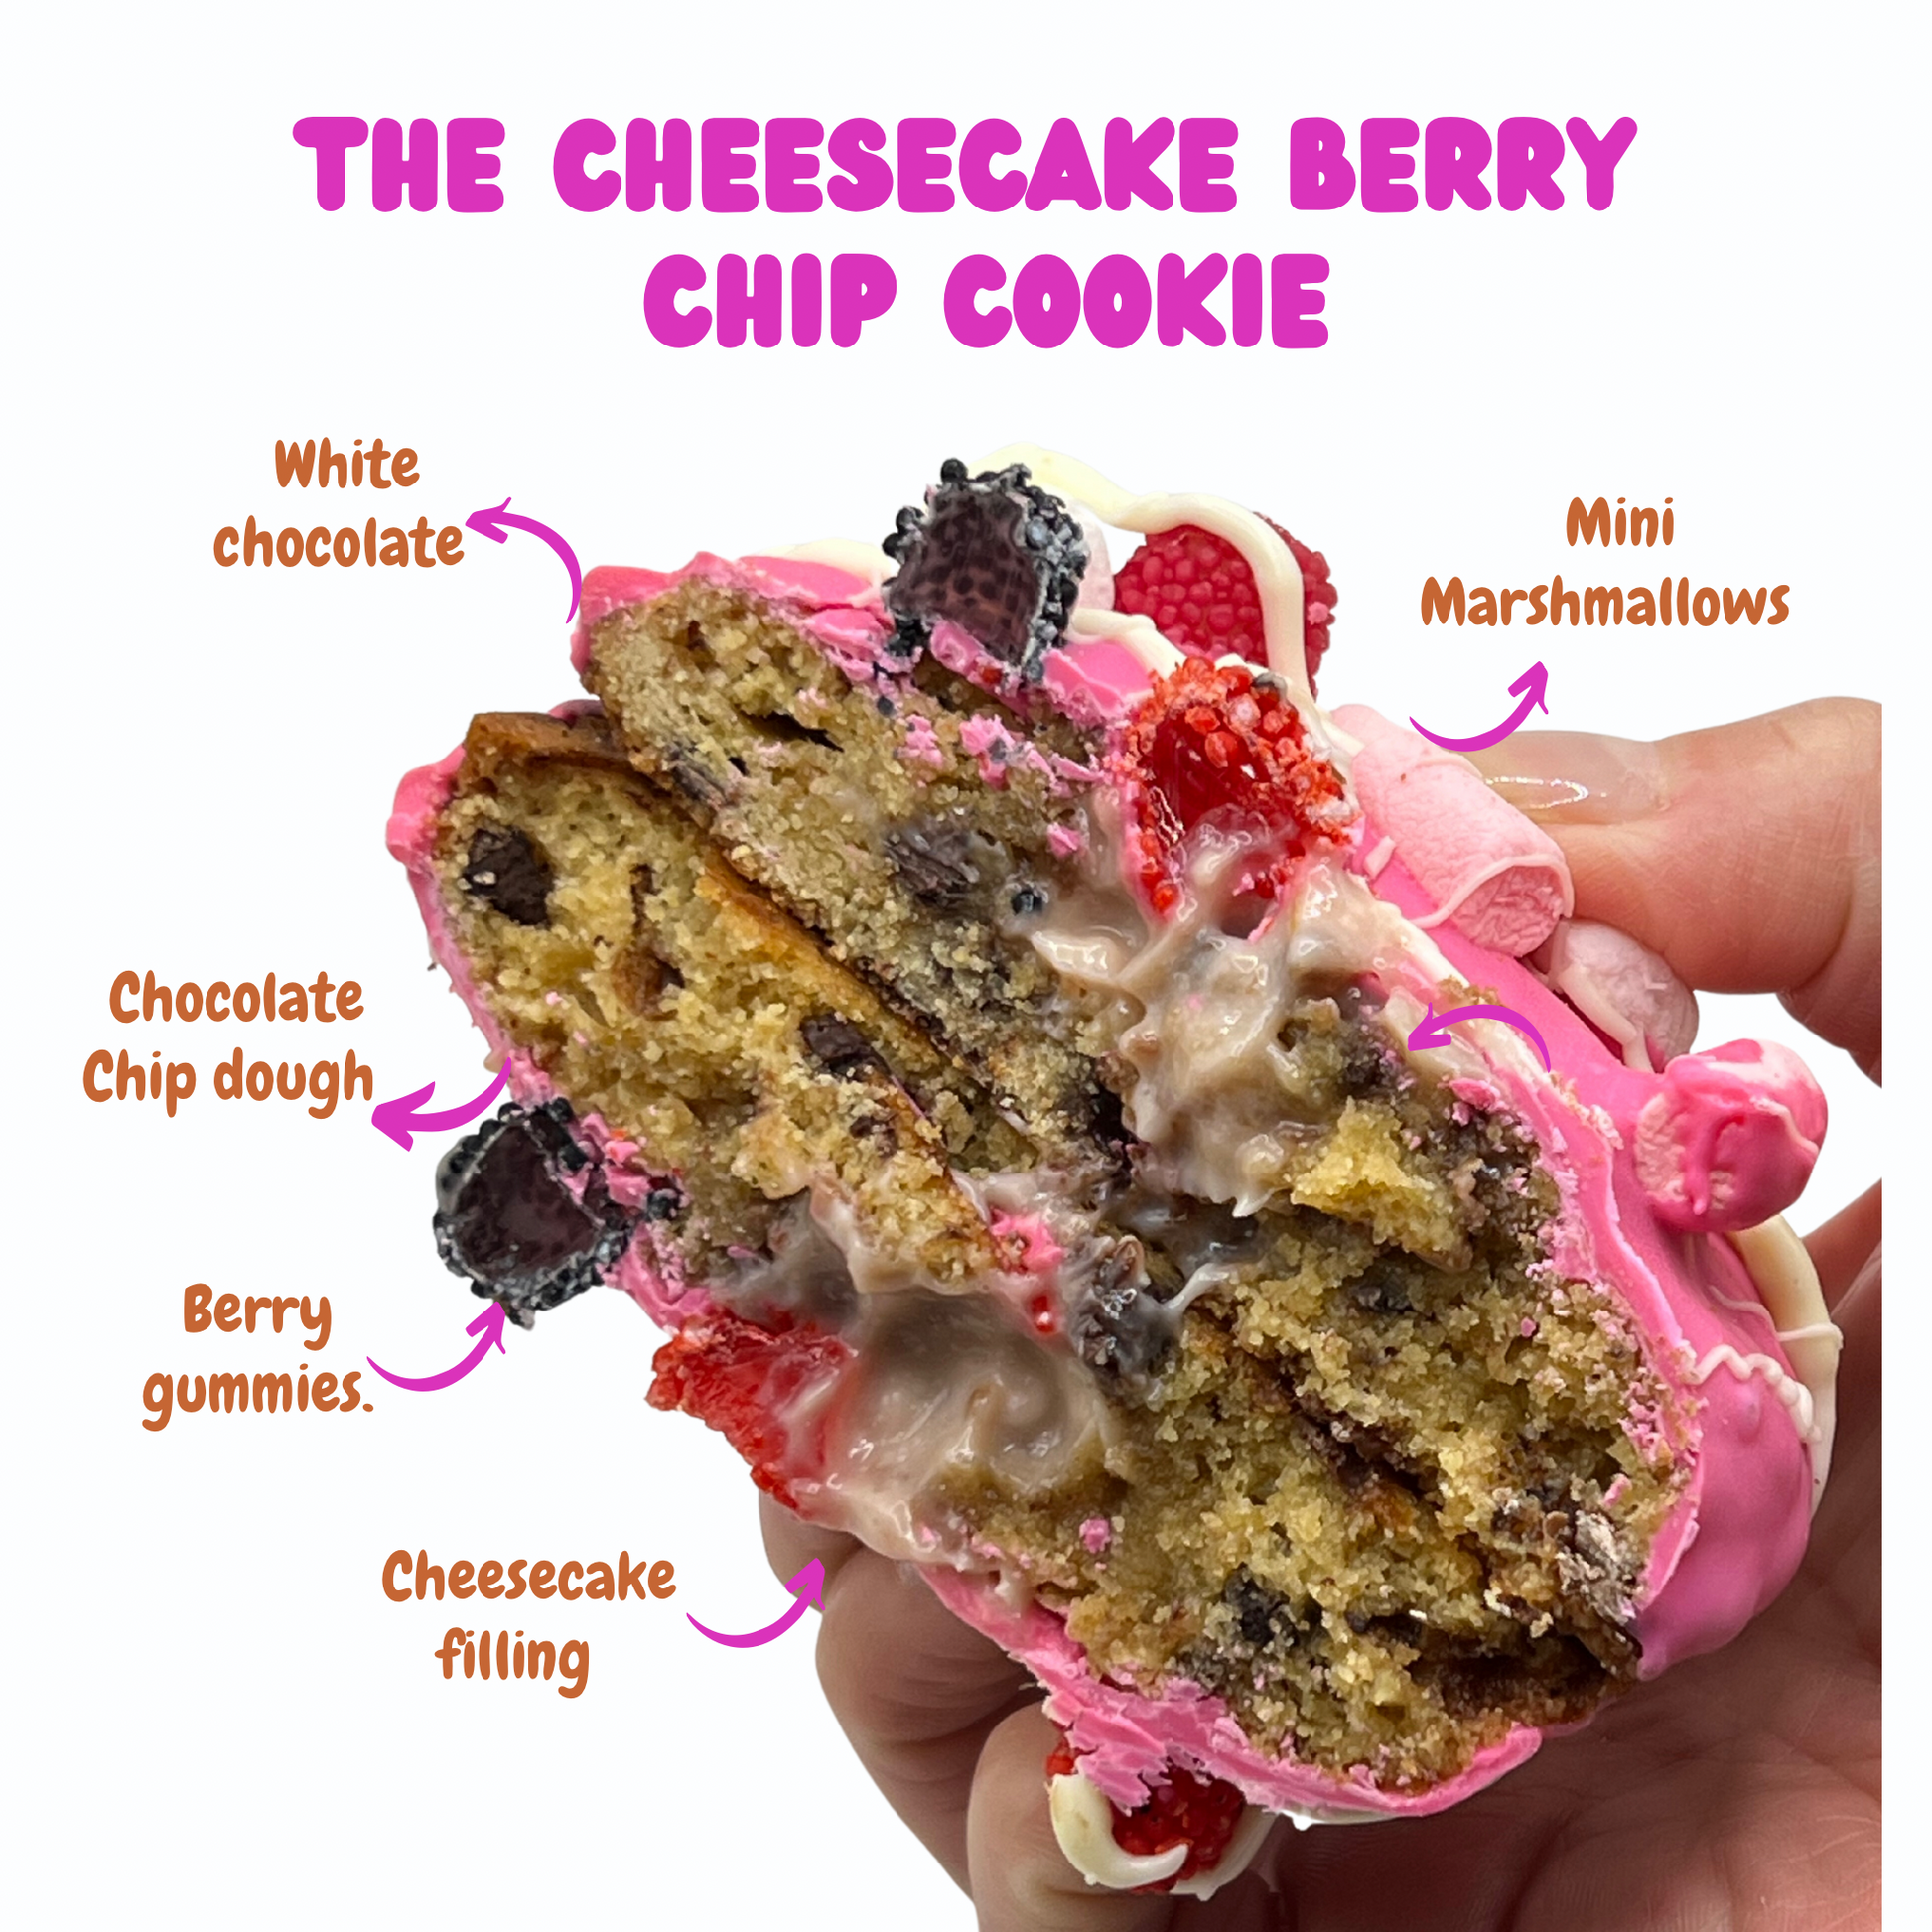 Indulgent Cheesecake Berry Chip Cookie - Creamy, tangy, and bursting with berry goodness.